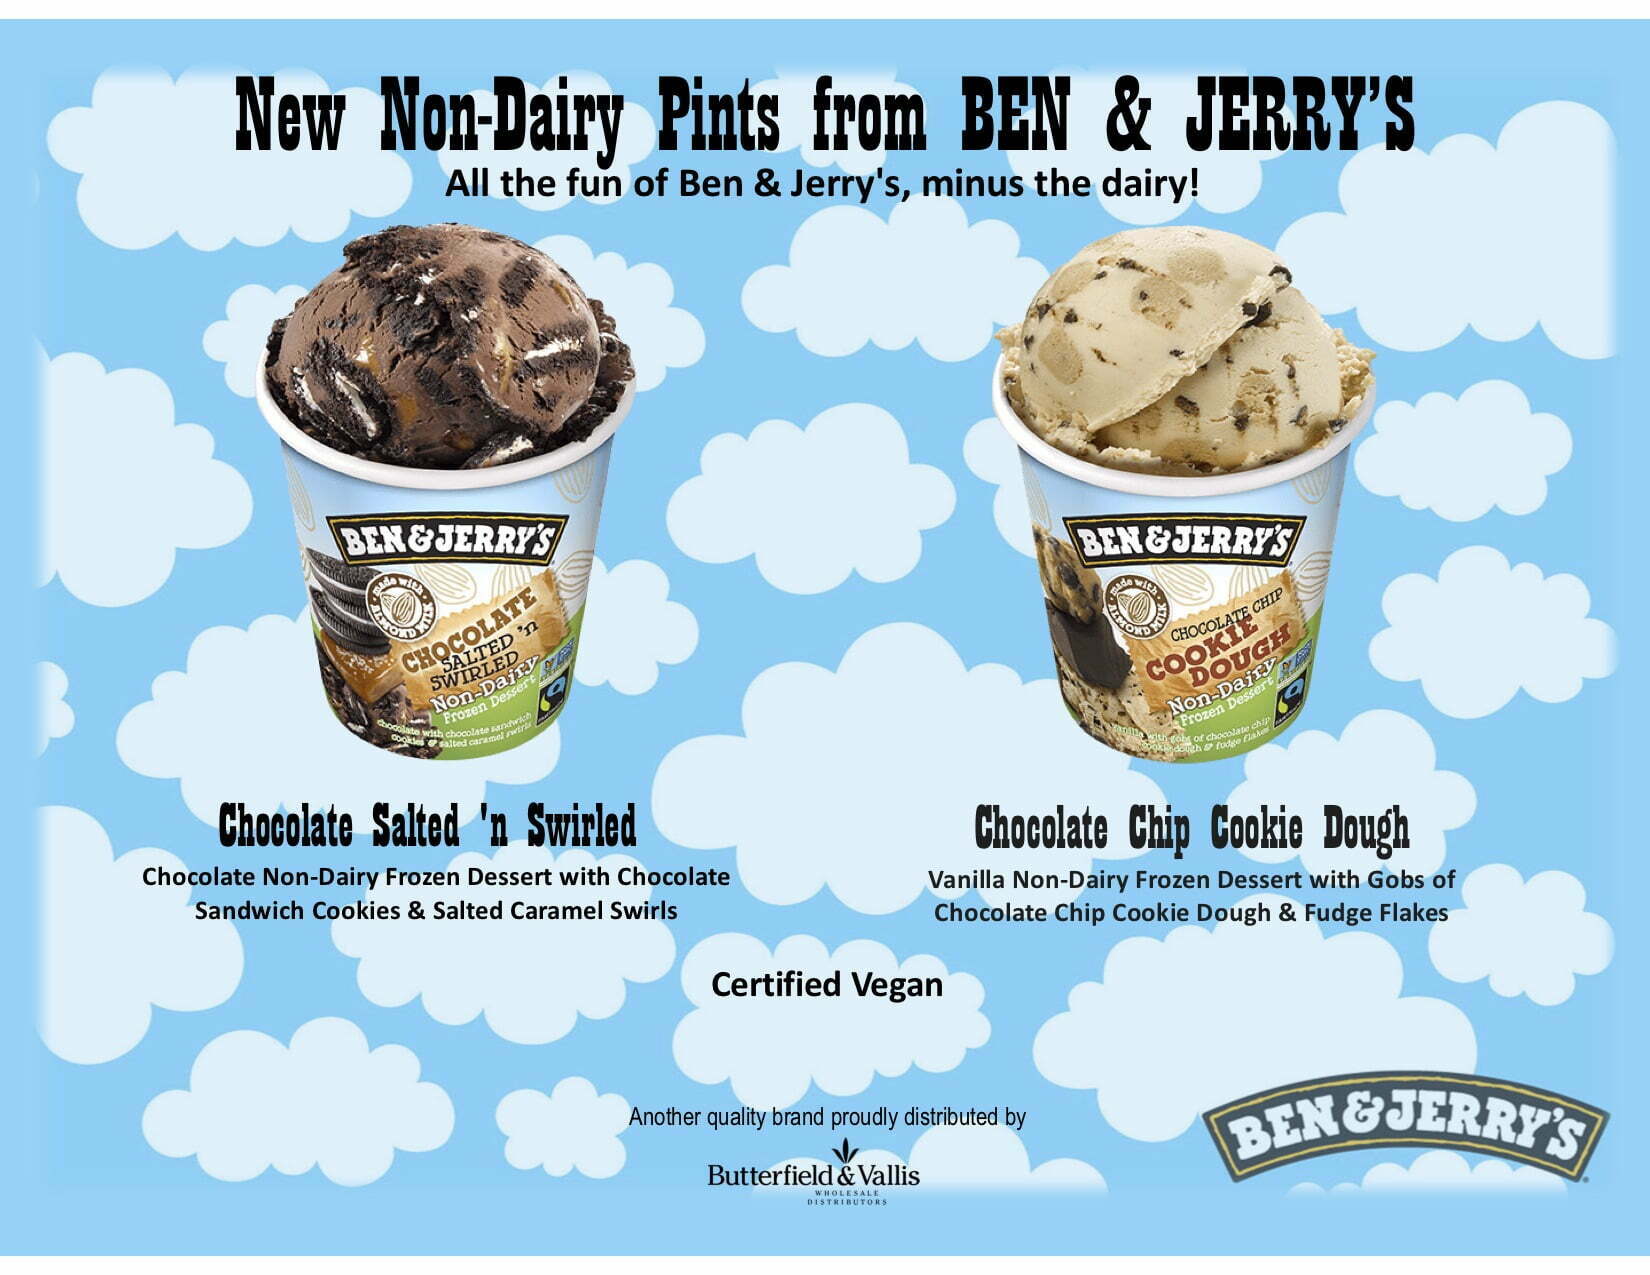 New from Ben & Jerry’s Dairy Free copy